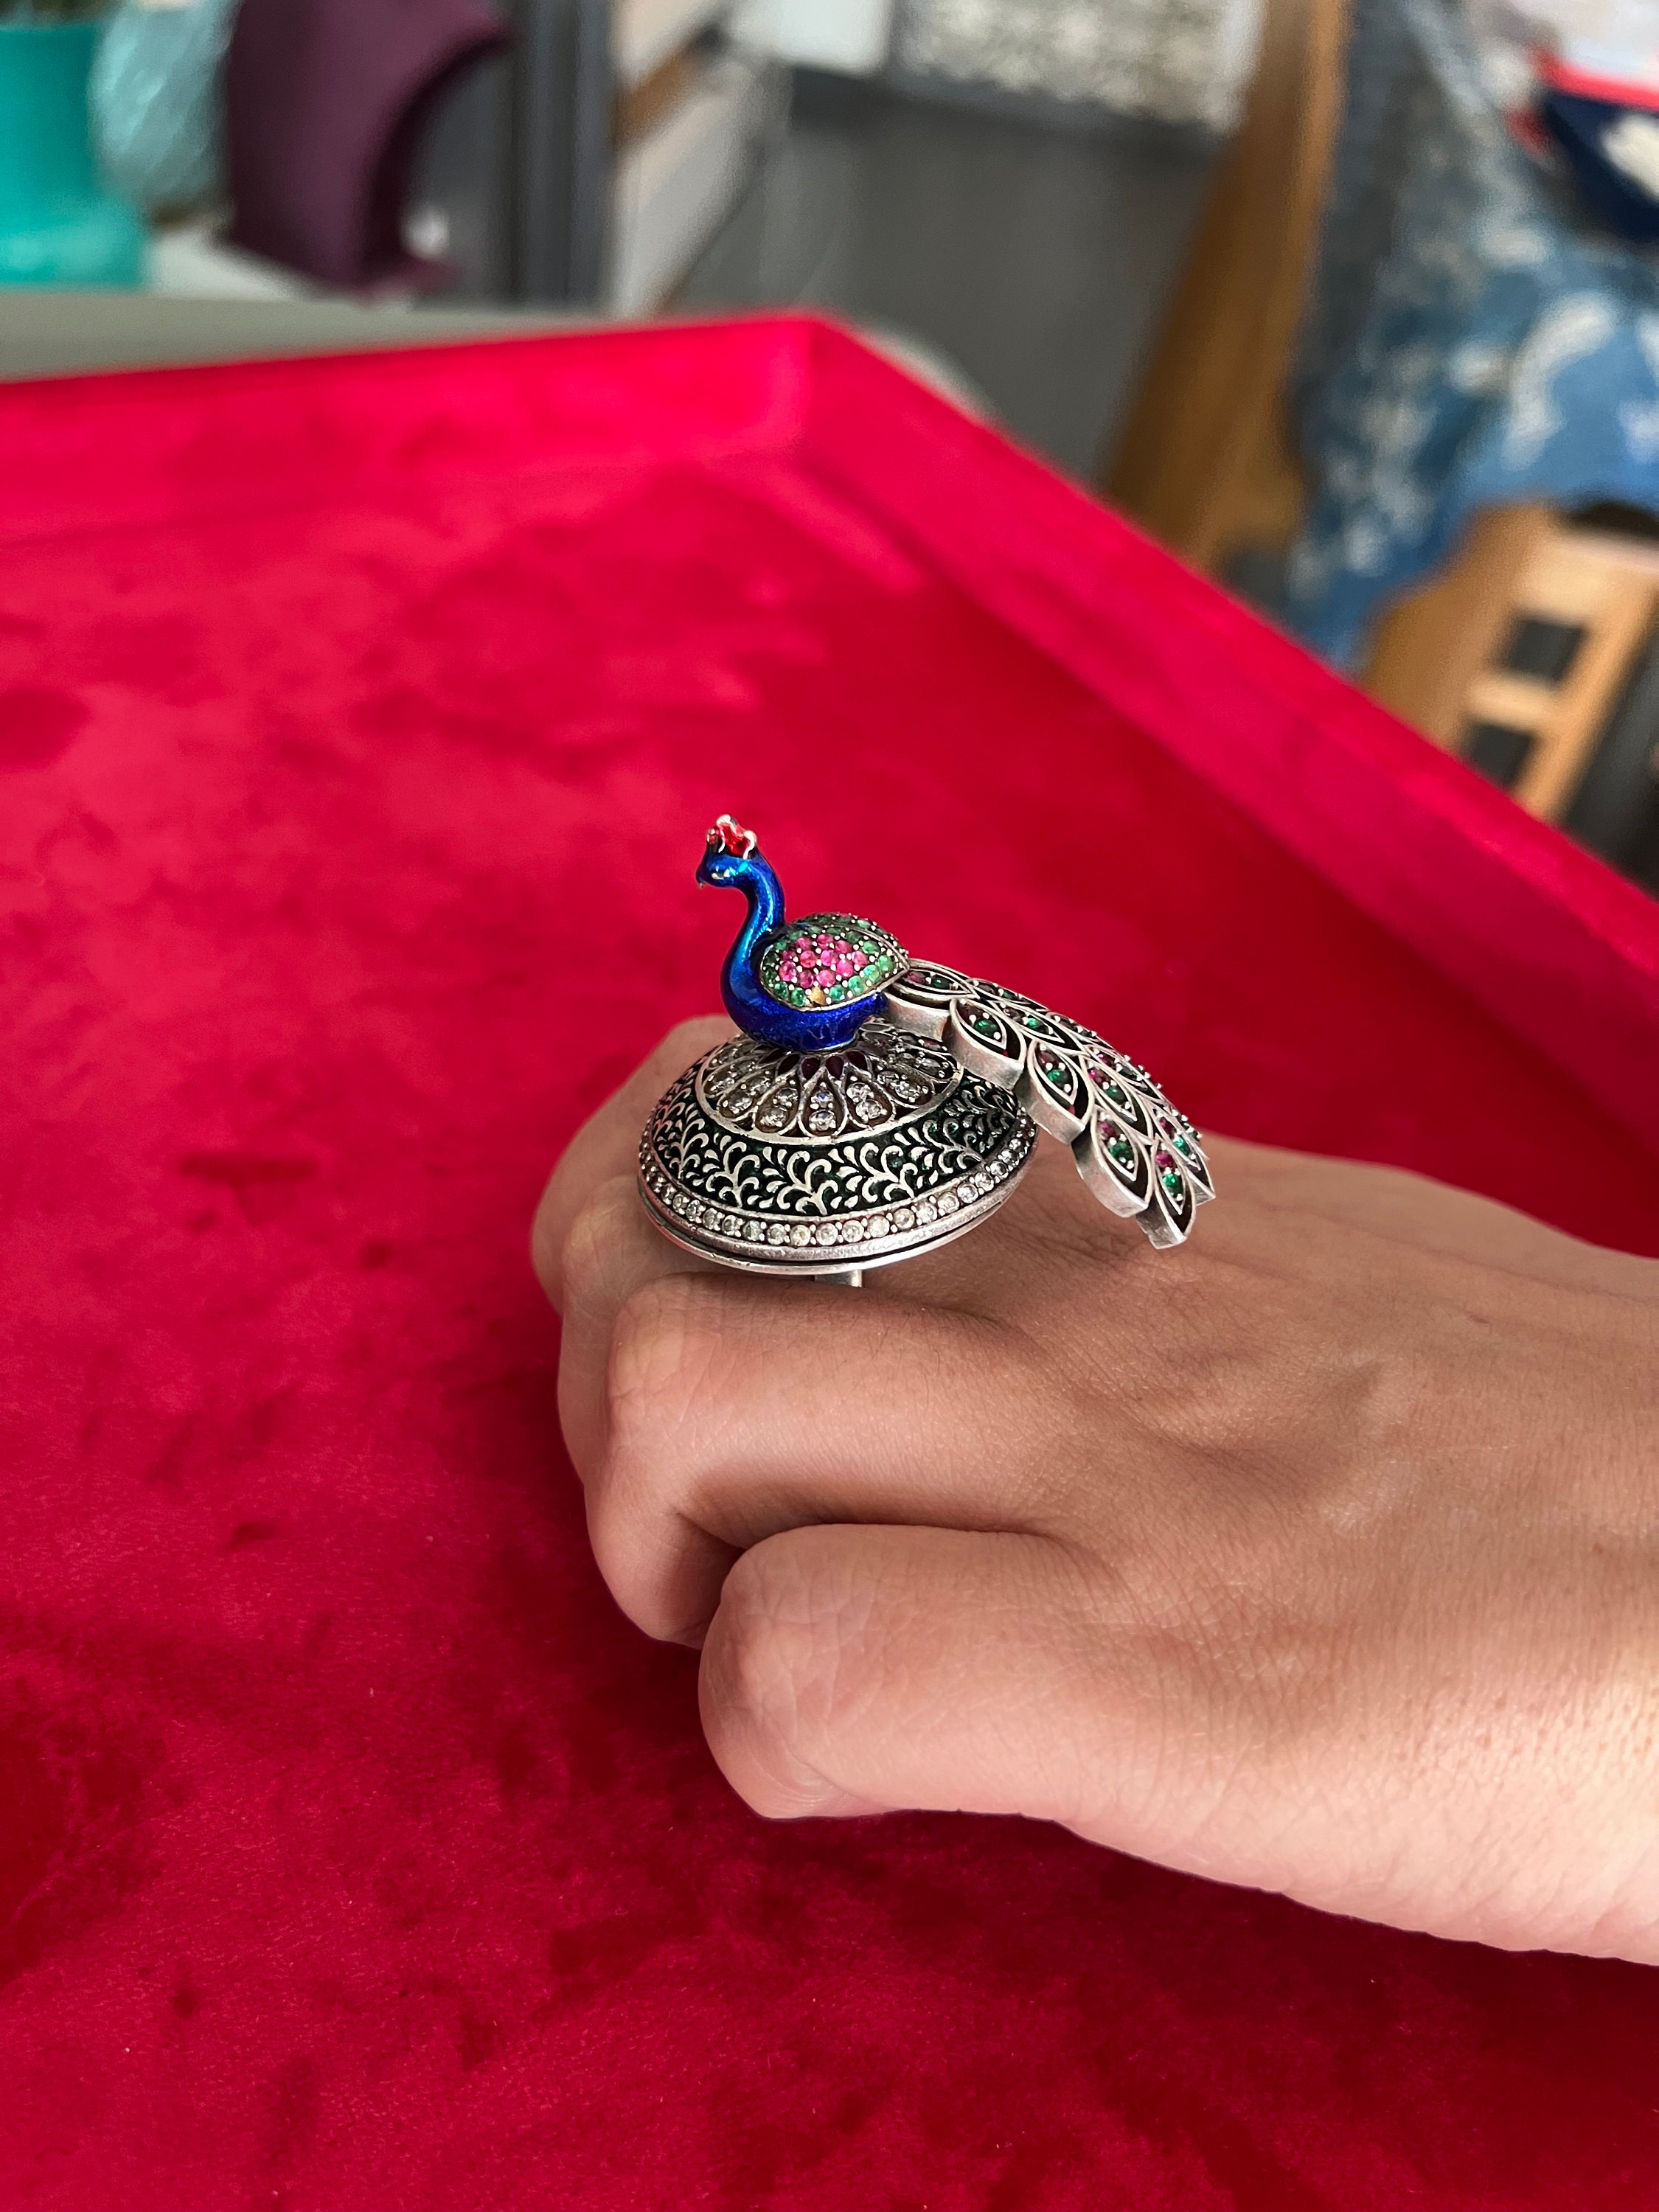 925 sterling silver handmade fabulous peacock design ring with amazing  noisy — Discovered